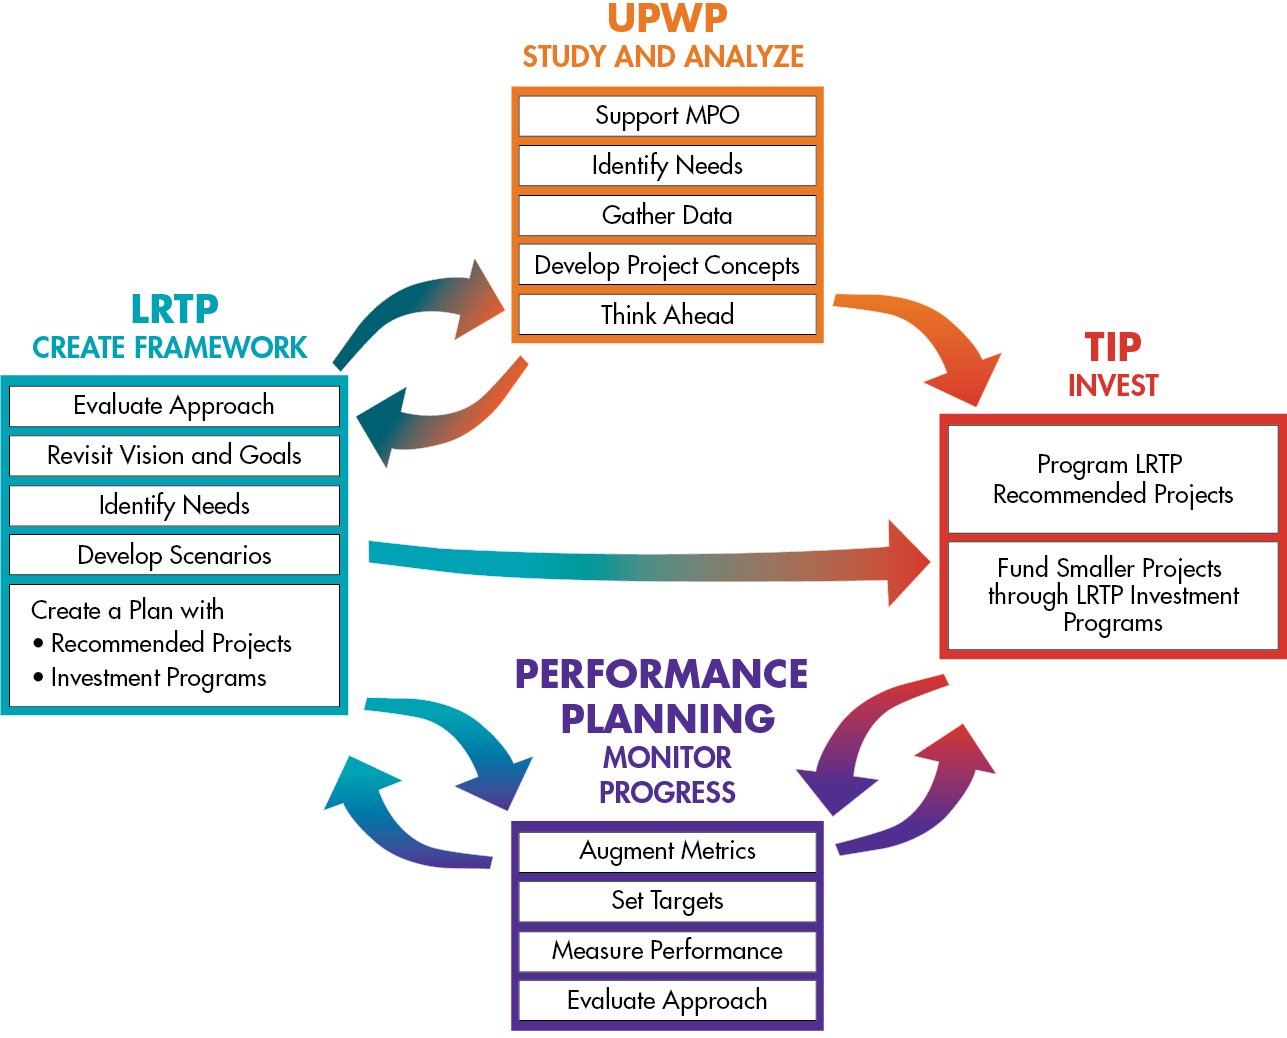 Figure 1-4. Relationship between the LRTP, TIP, UPWP, and Performance-Based Planning Process
Figure 1-4 is a text figure with directional arrows that shows how the different facets of each of the MPO’s four 3C programs complement and support each other.